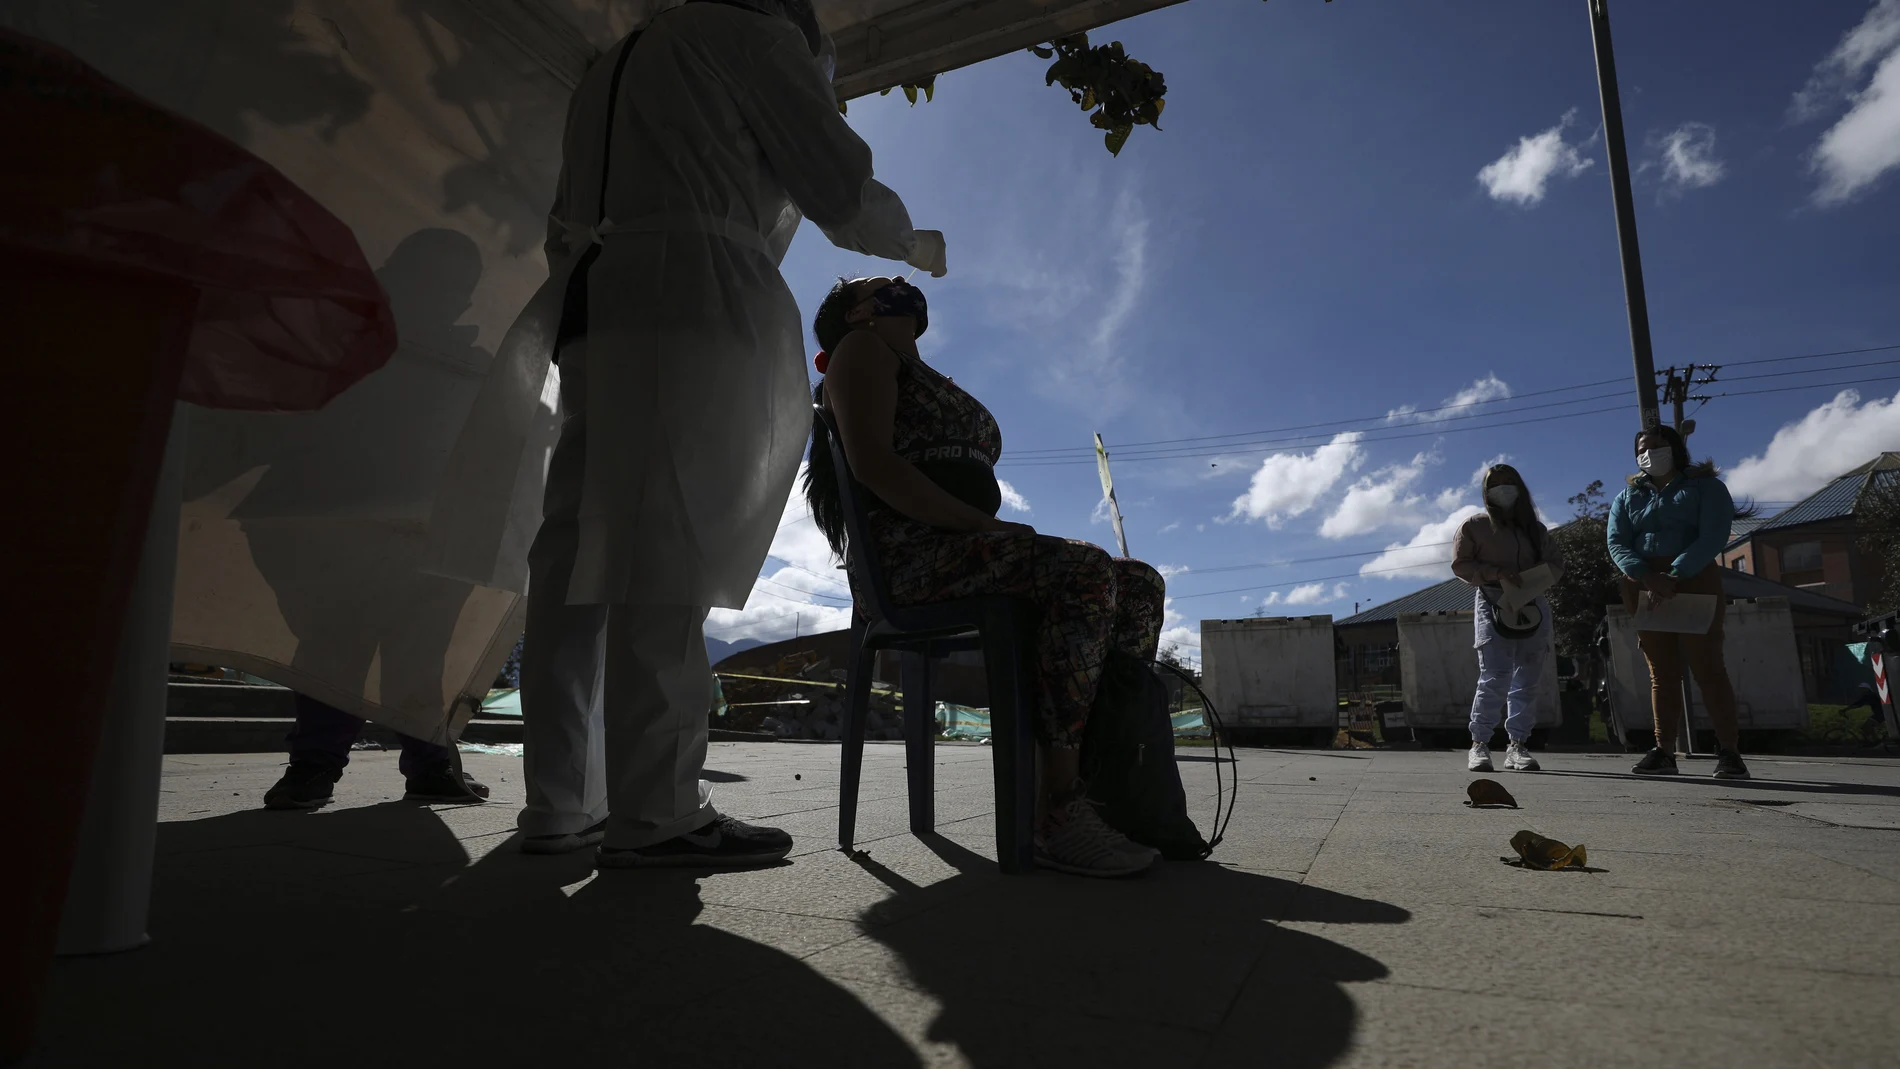 A healthcare worker collects a nasal swab sample to test for COVID-19, in Bogota, Colombia, Wednesday, Jan. 27, 2021. The Colombian government announced that the first shipment of new coronavirus vaccines will arrive in February. (AP Photo/Fernando Vergara)